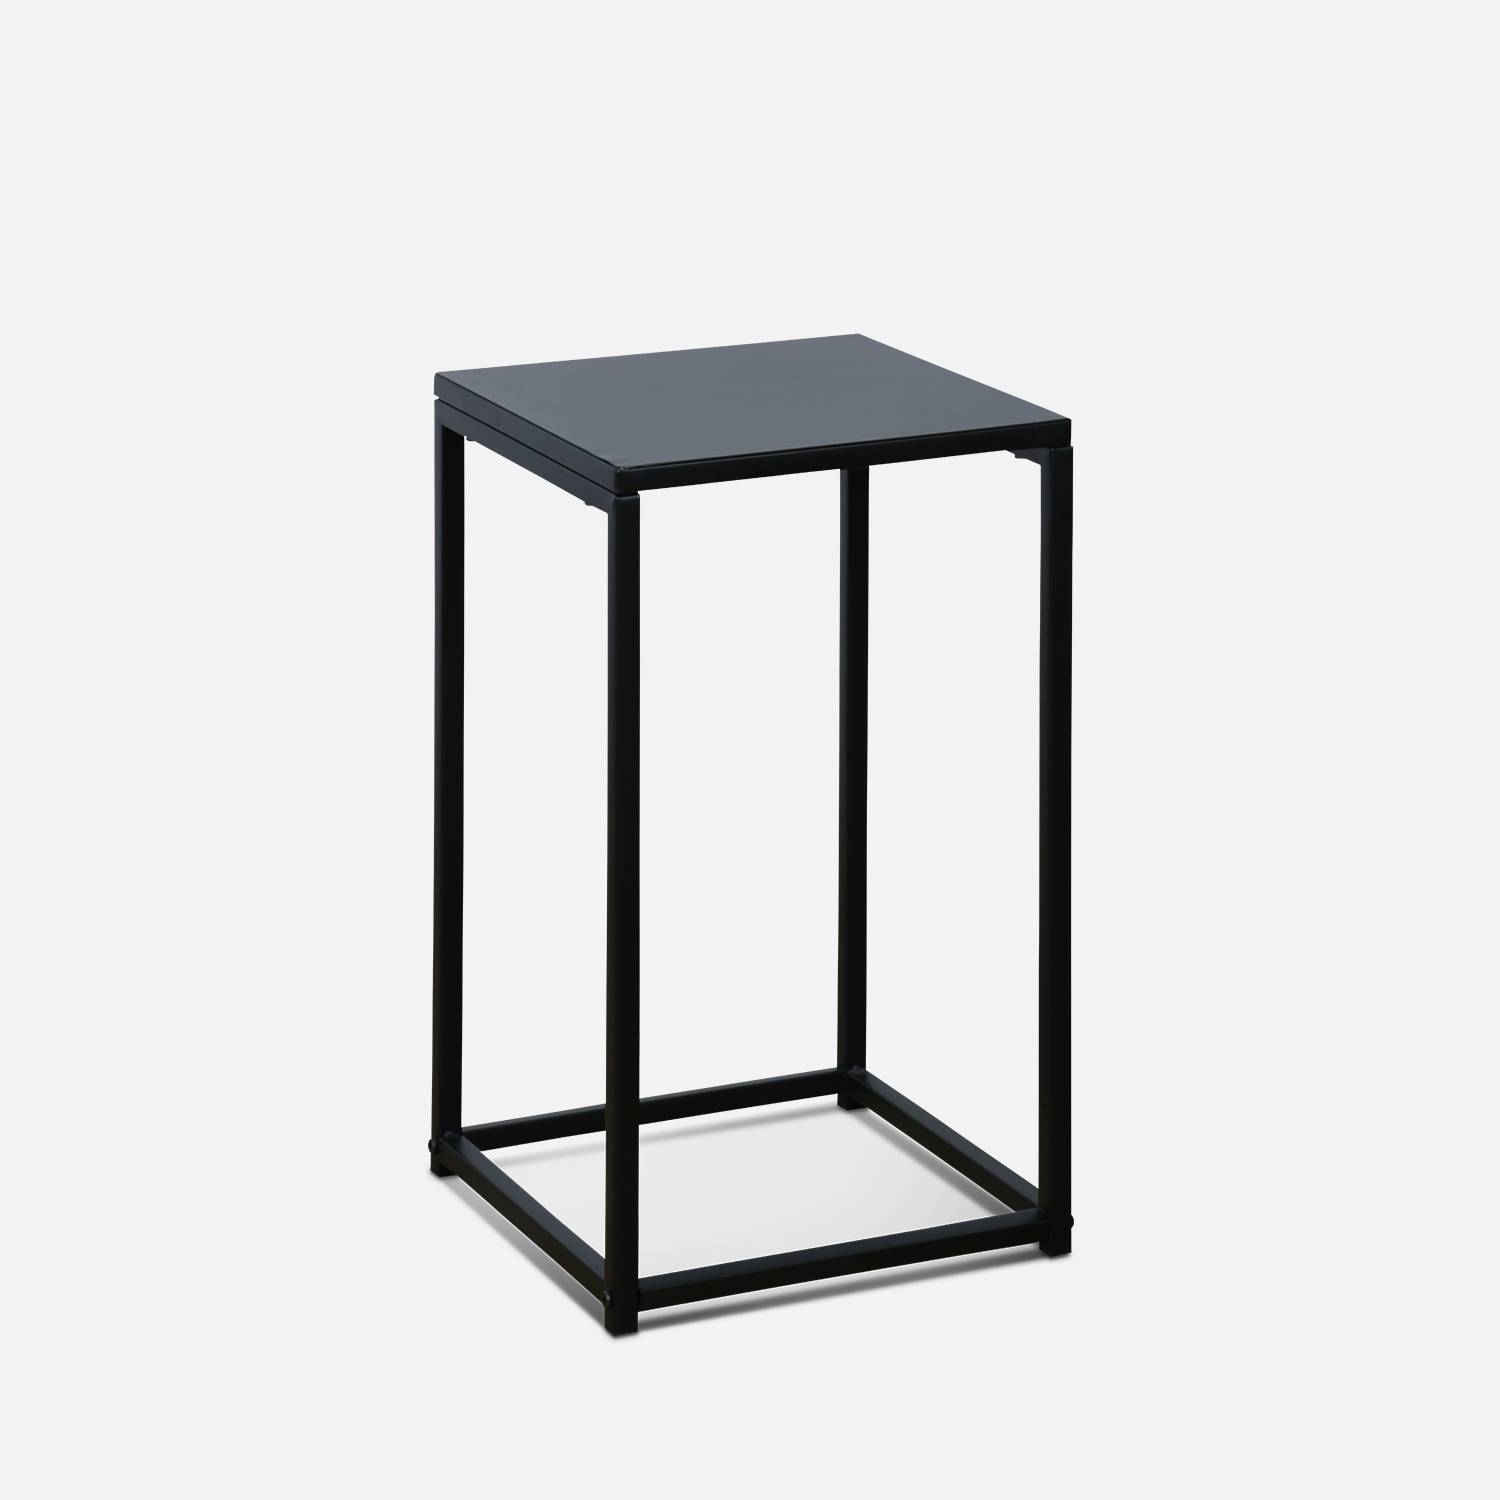 Set of 2 side tables/ end of sofa , Industrielle, Black Photo5